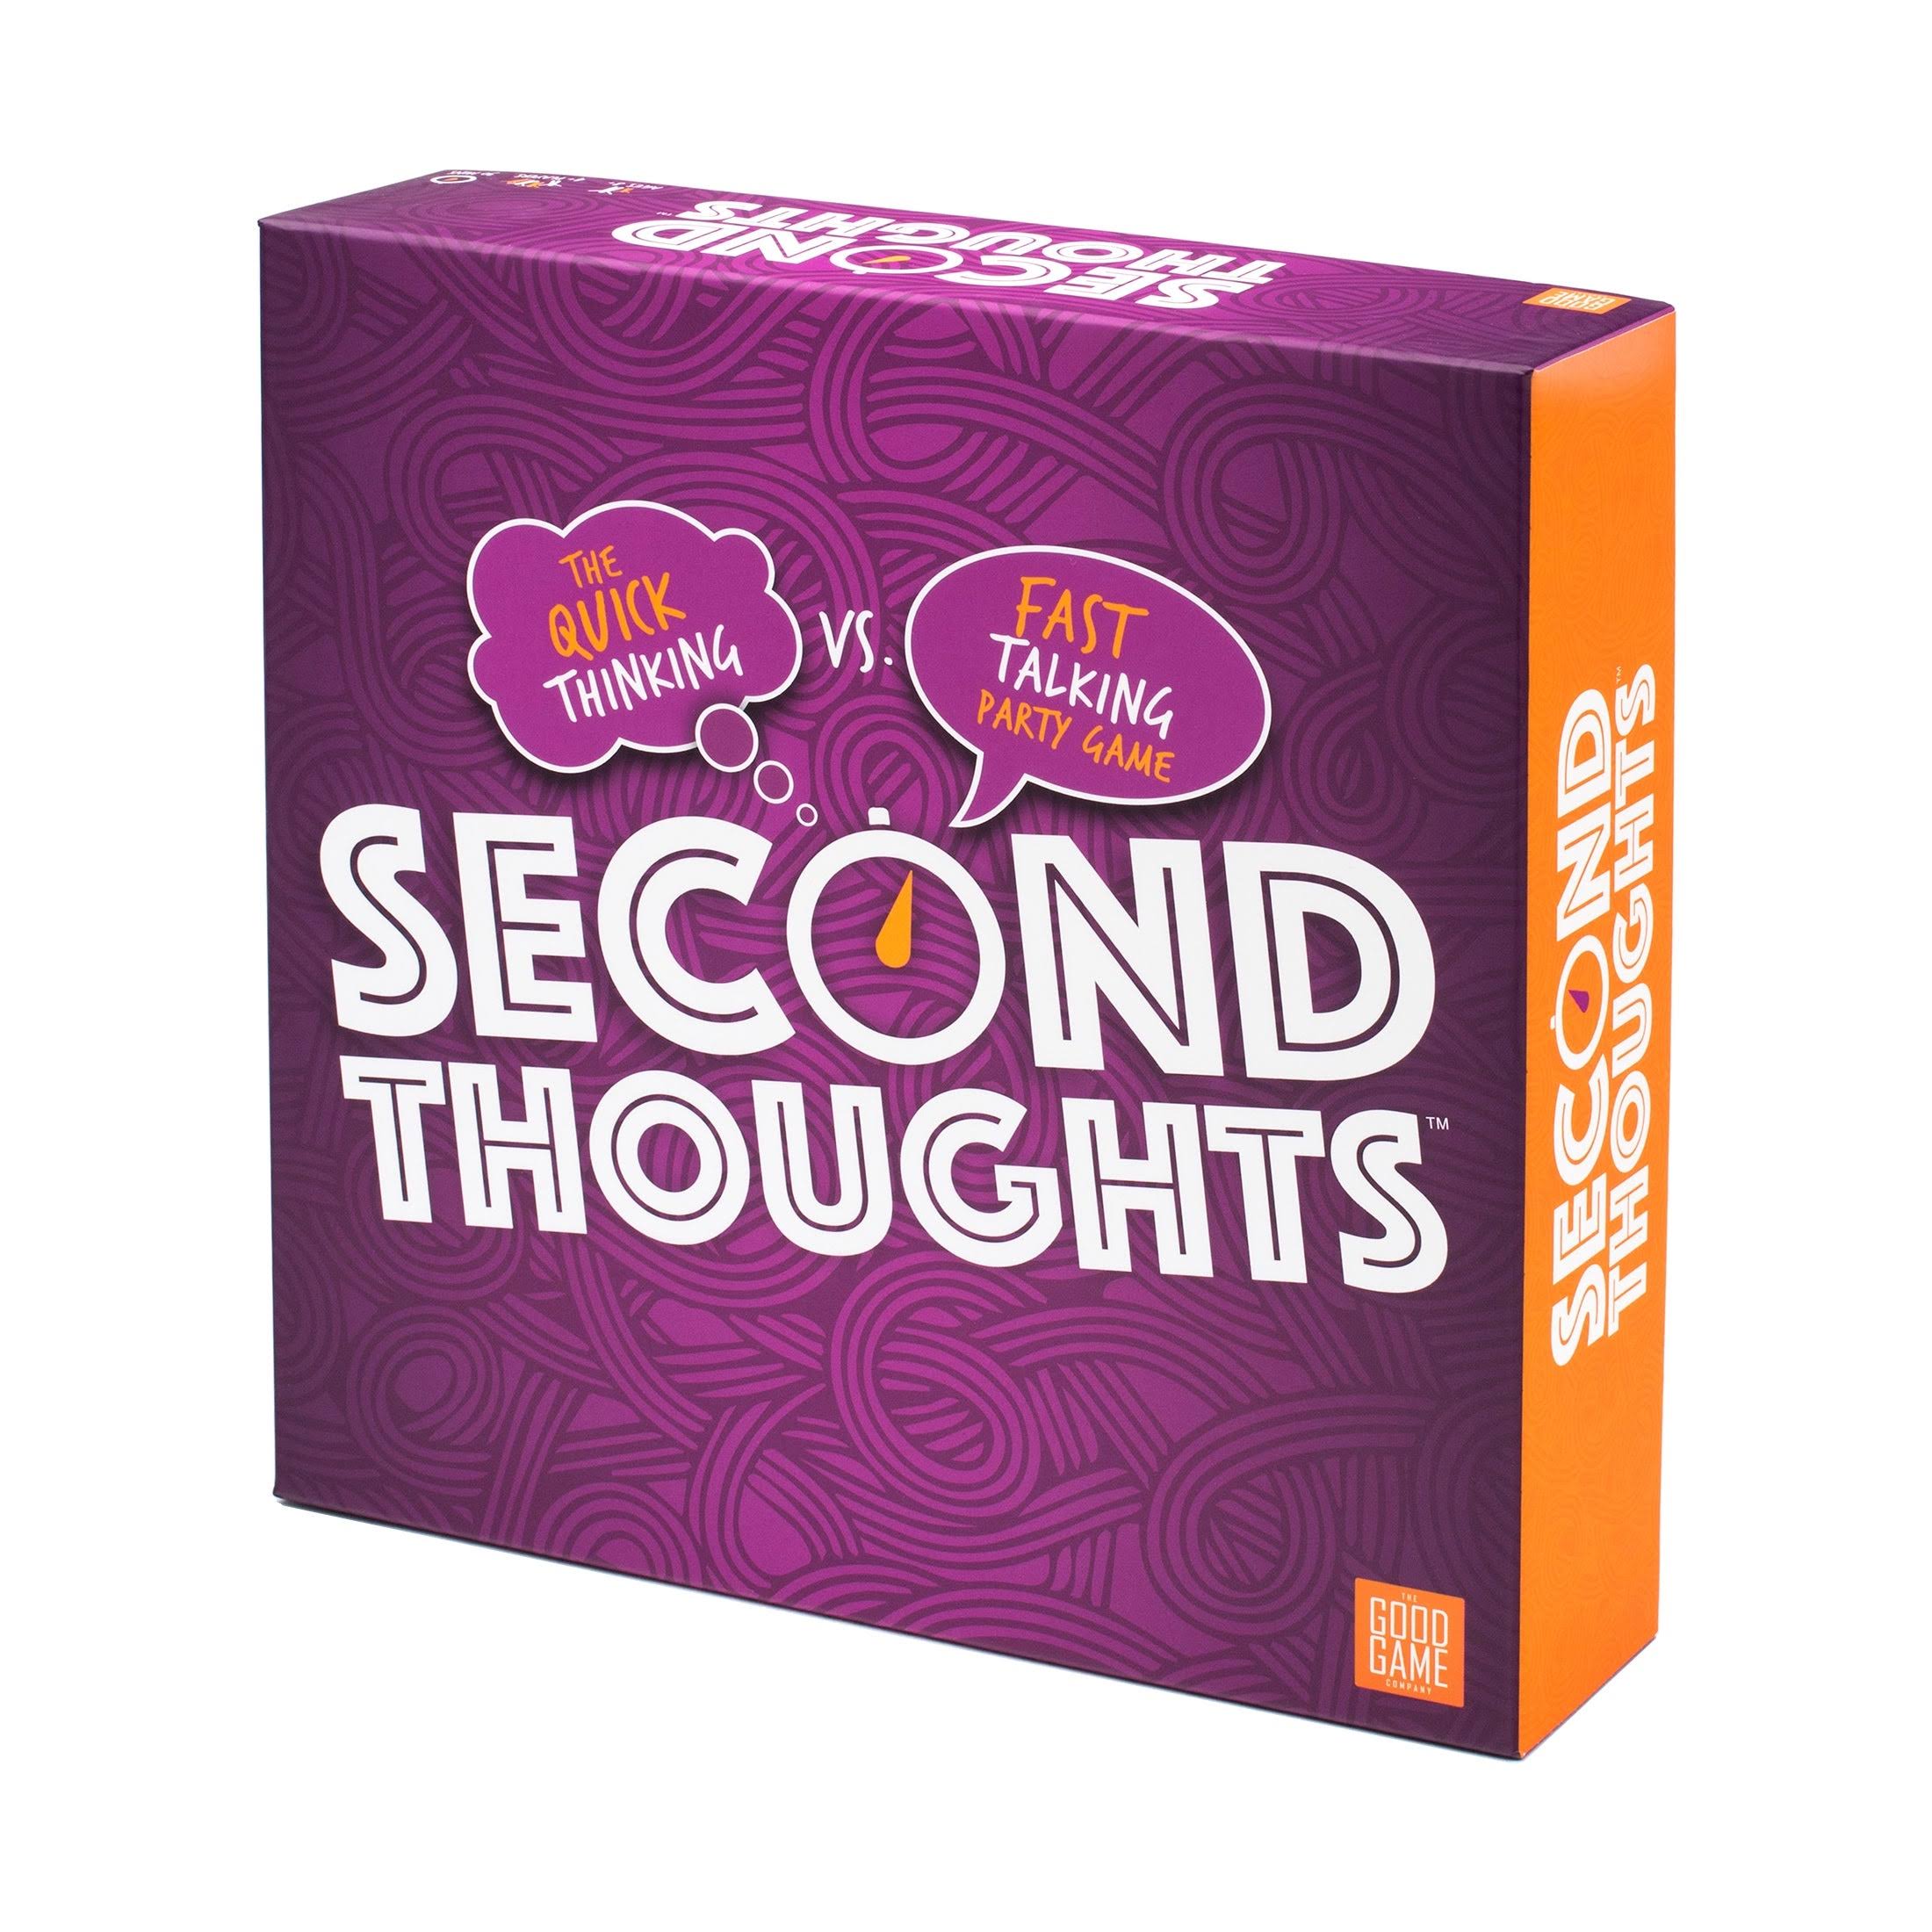 The Good Game Company Second Thoughts The Quick Thinking VS Fast Talking Party Game